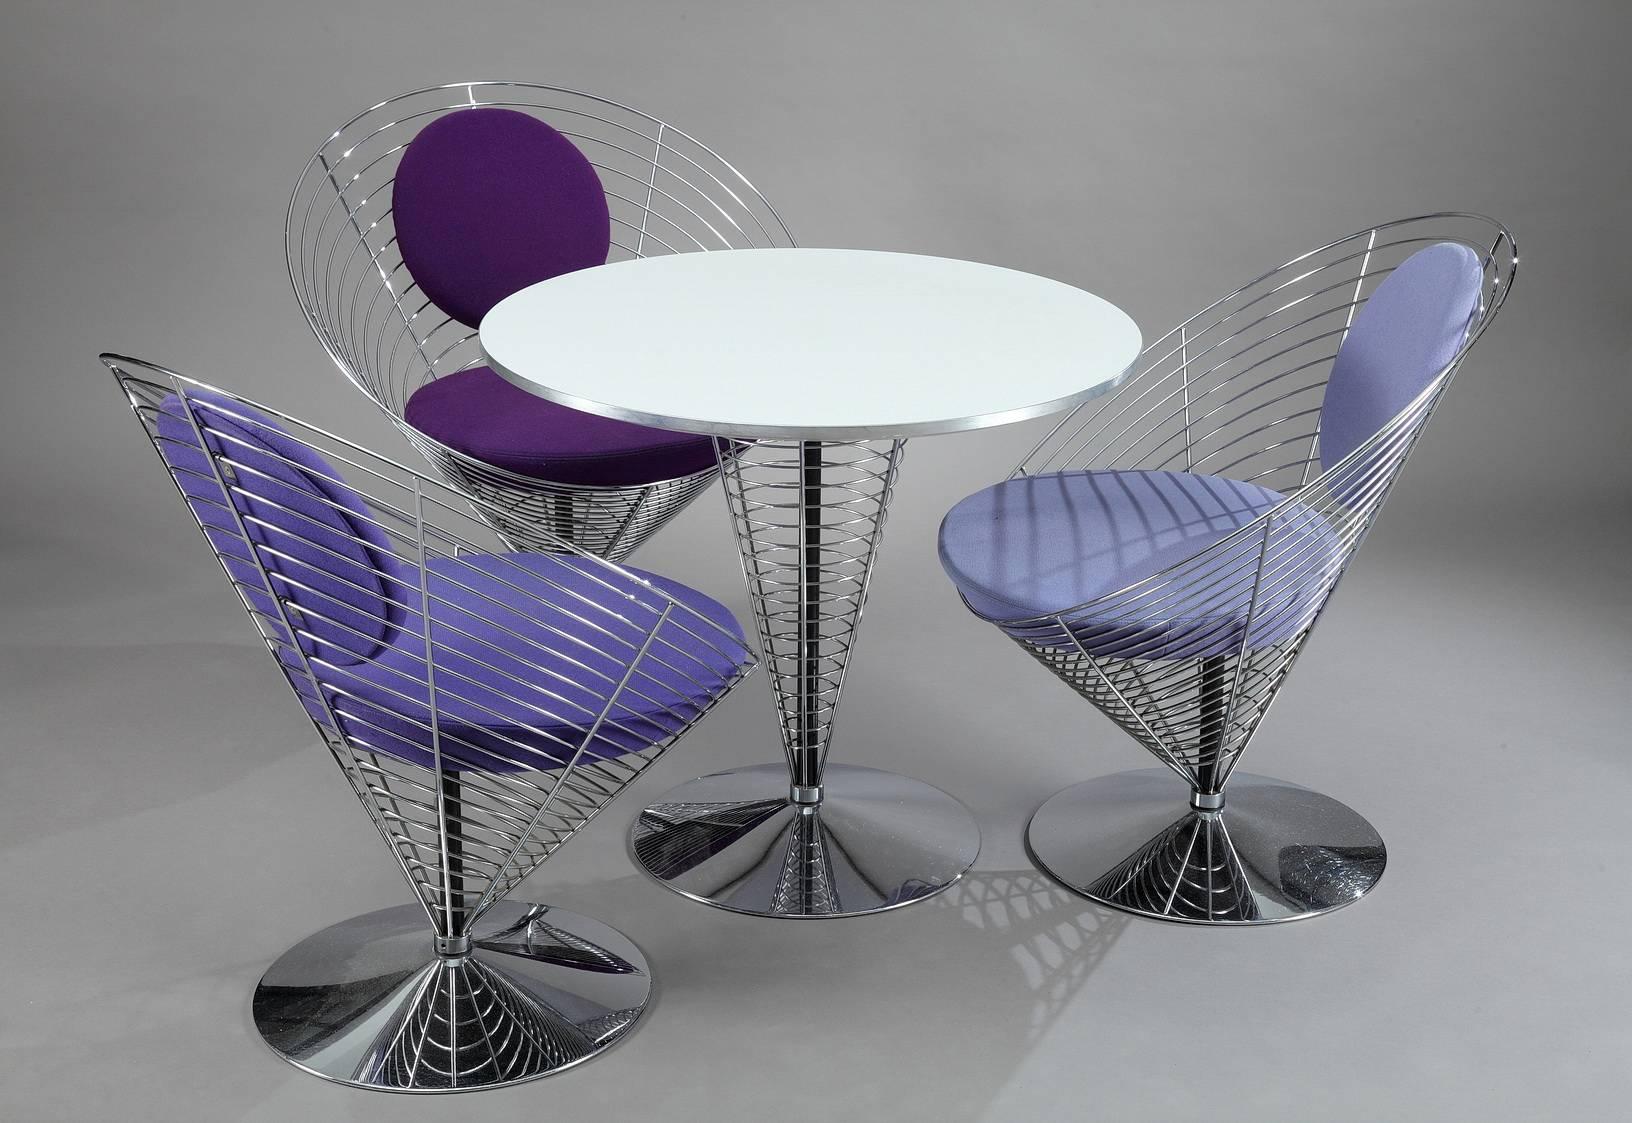 Three wire cone chairs and table in chromed steel, blue and purple wool. White tabletop on a centre foot with mesh. Designed in 1958-1959 by Verner Panton, manufactured by Fritz Hansen (Denmark) during late 1980s and early 1990s. No longer in